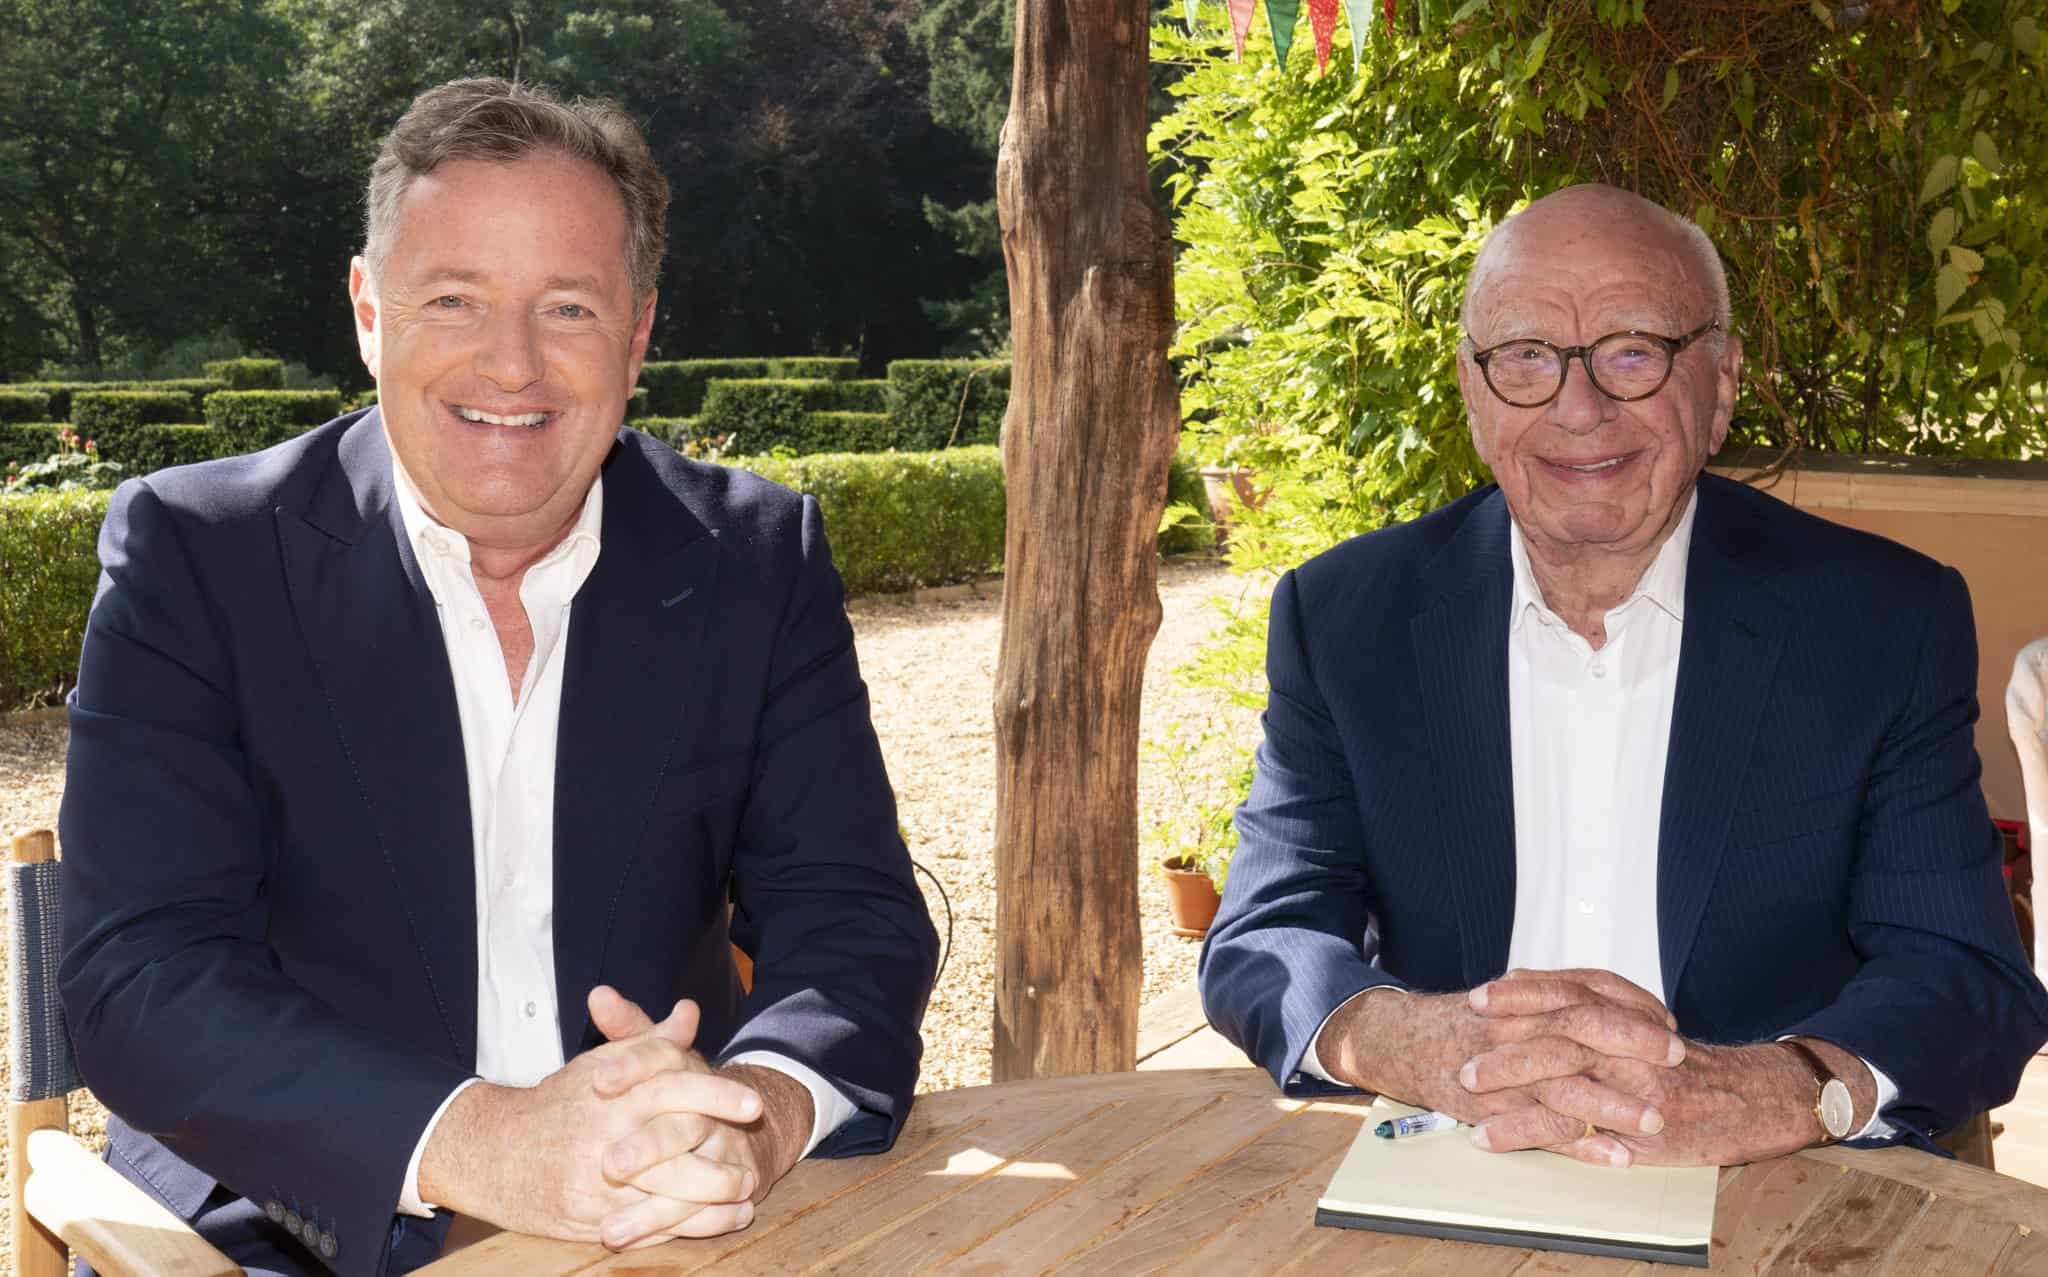 Murdoch announces new TV channel – and Piers Morgan will front it